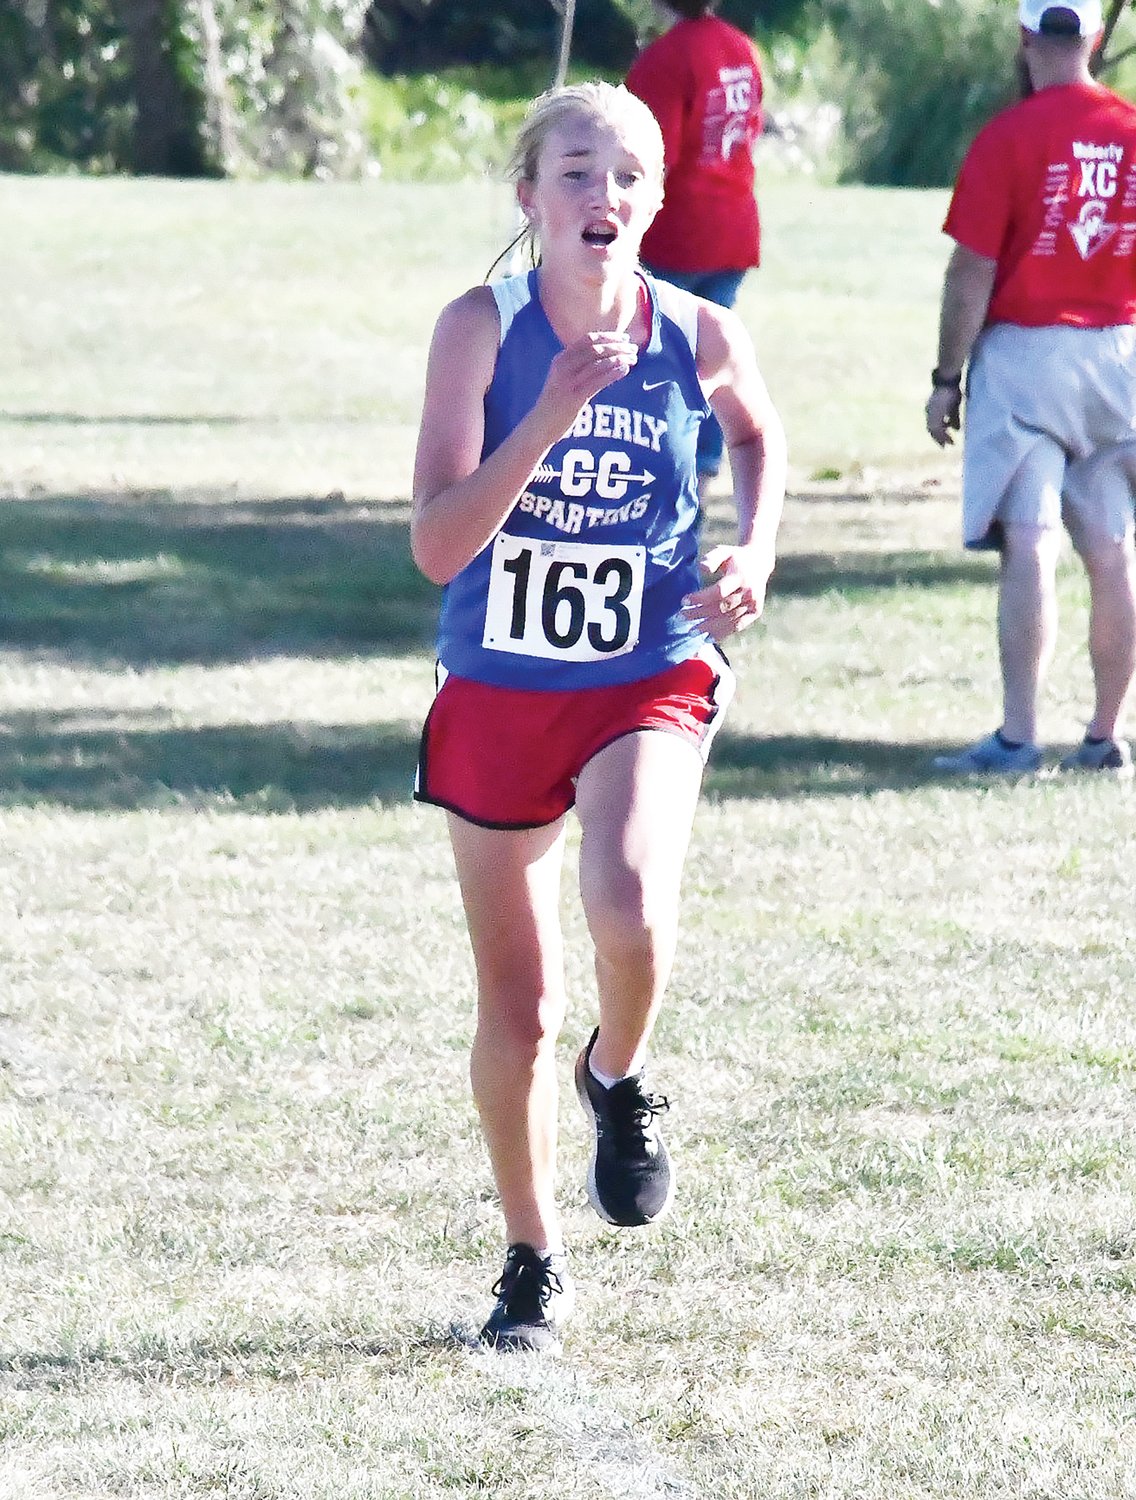 Moberly freshman cross country runner Emily O’Loughlin had a sparkling debut on Tuesday, Aug. 30, taking 12th overall in the informal Salisbury 3500 run at Salisbury Municipal Golf Course.